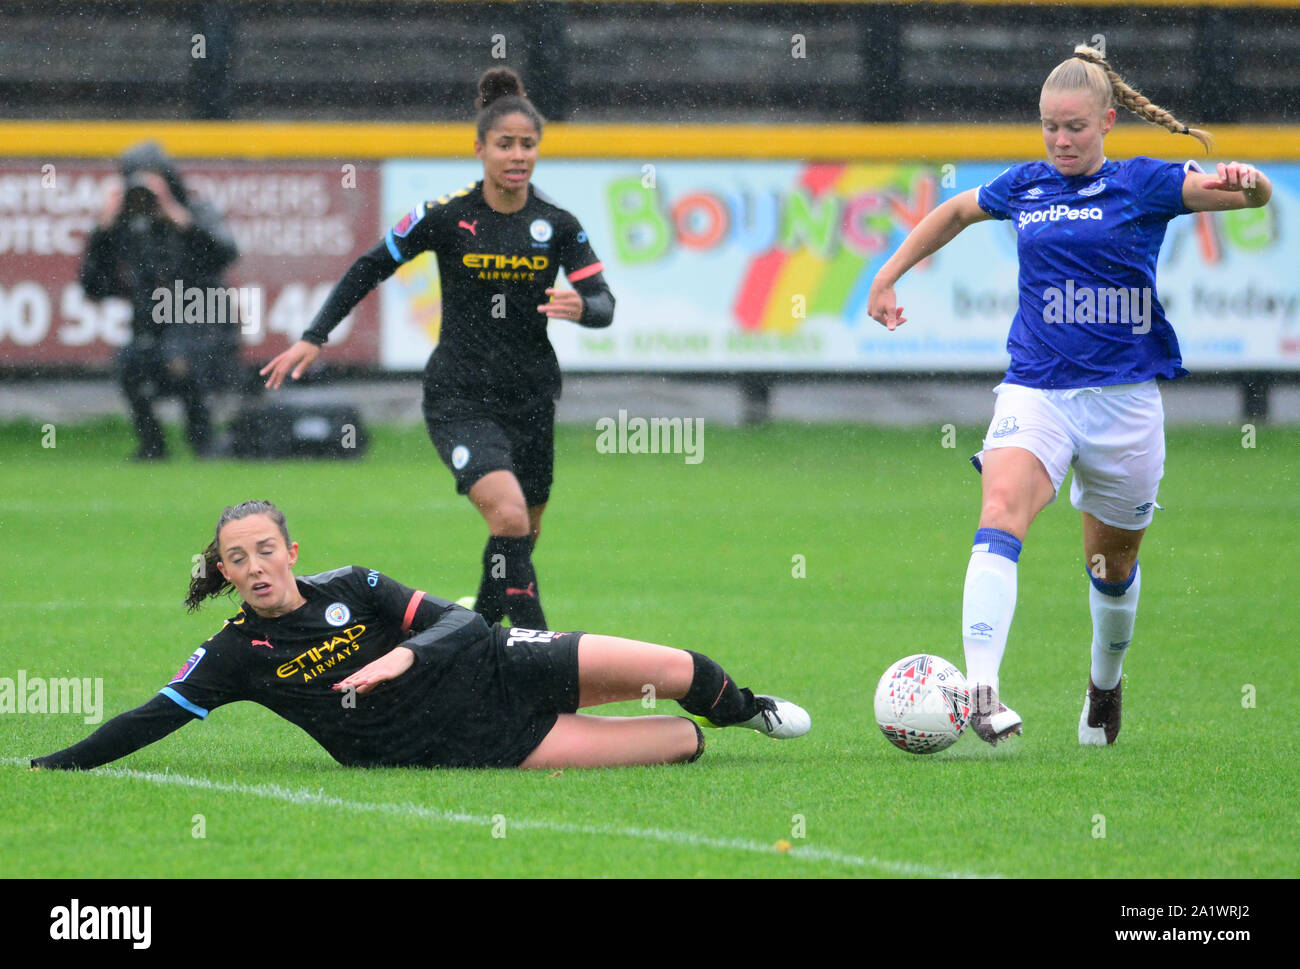 Everton's Kika Van Es and Manchester City's Caroline Weir battle for the ball during the FA Women's Super League match at the Merseyrail Community Stadium, Southport. Stock Photo